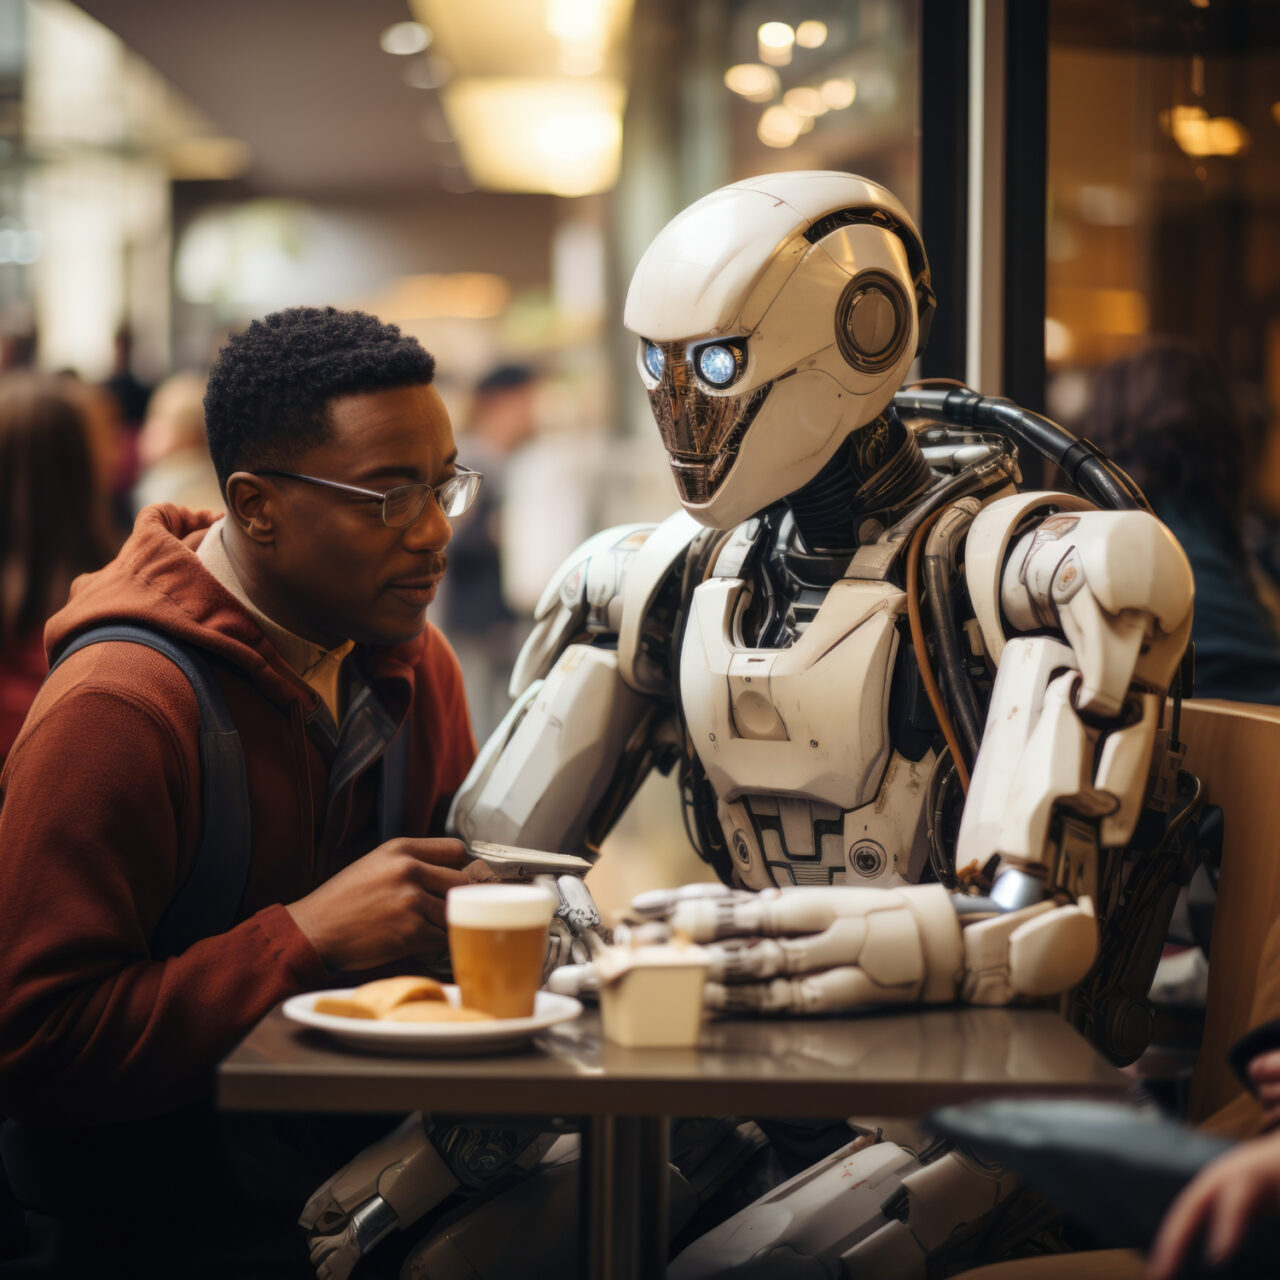 African man wearing glasses and a hoodie engages in conversation with a robot sitting on the table, both enjoying coffee